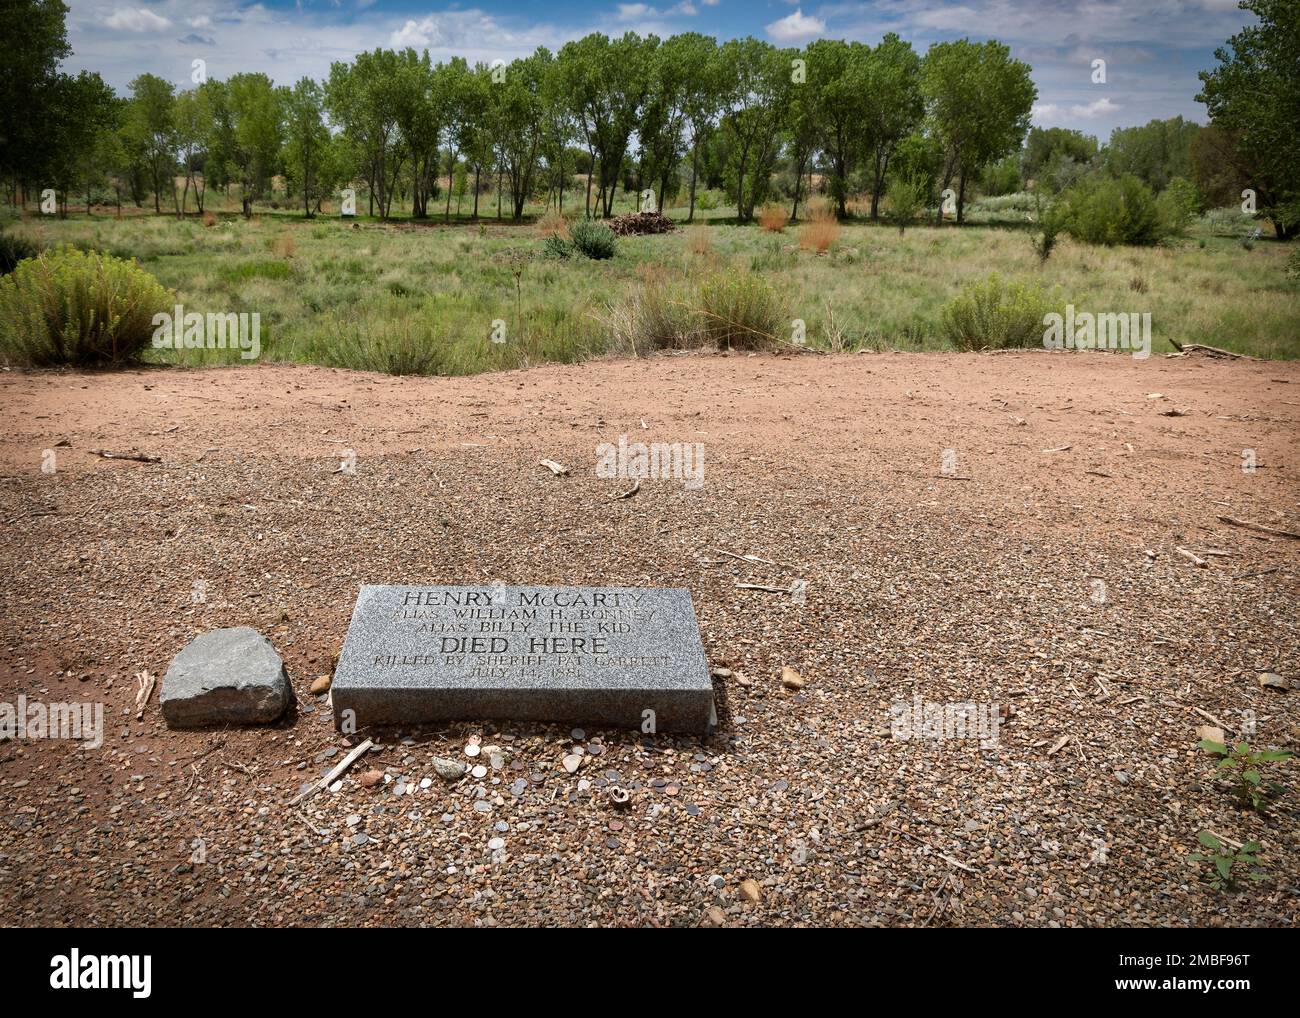 This stone marks the spot where Henry McCarty, aka William H. Bonney, and Billy the Kid died at the Maxwell Ranch in Fort Sumner, New Mexico. Stock Photo